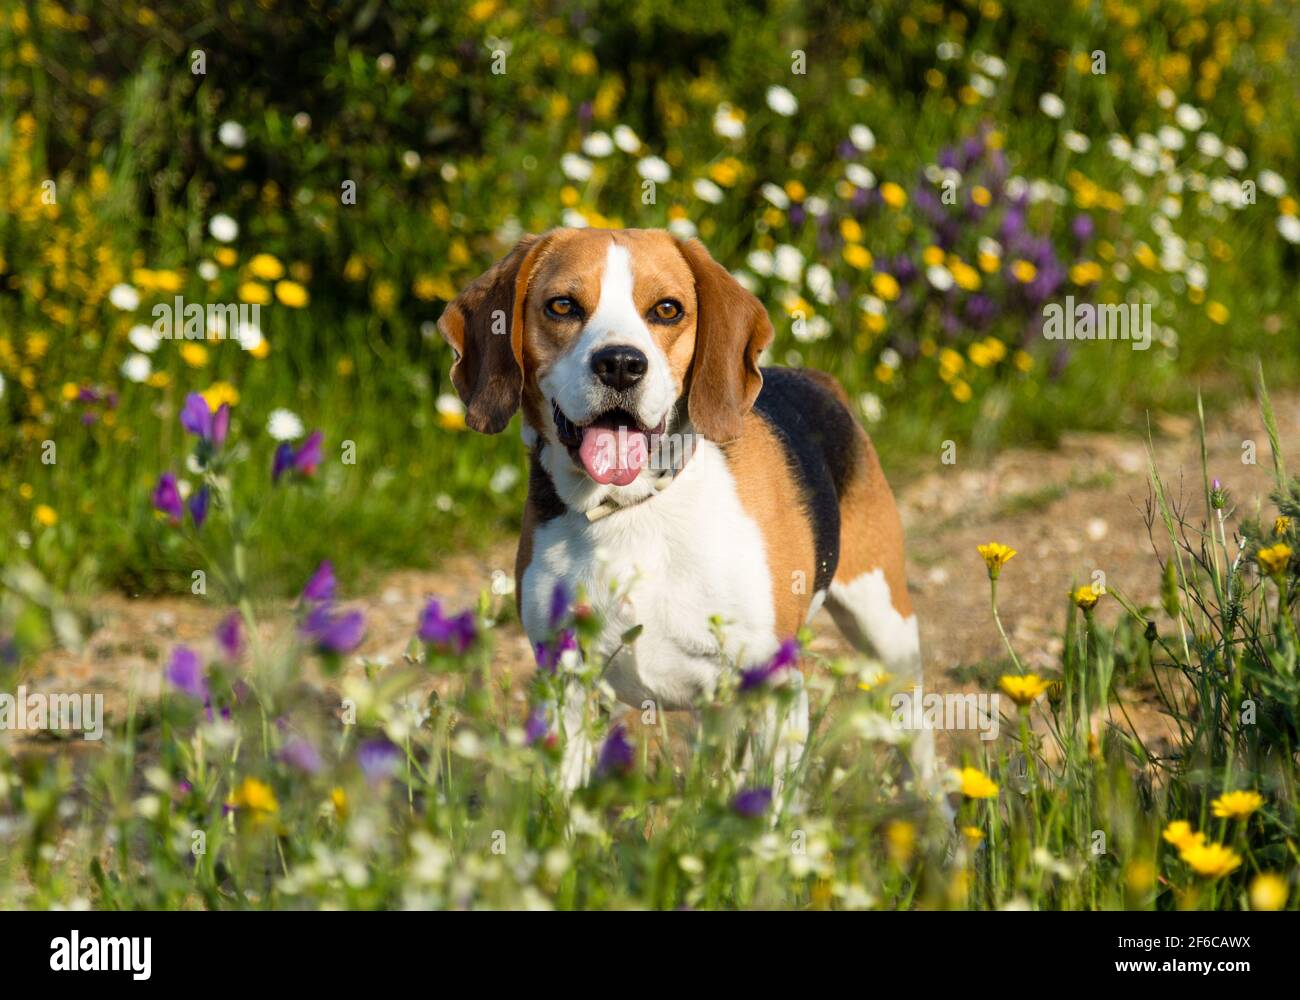 Portrait of a Beagle dog during a walk in a spring. Stock Photo